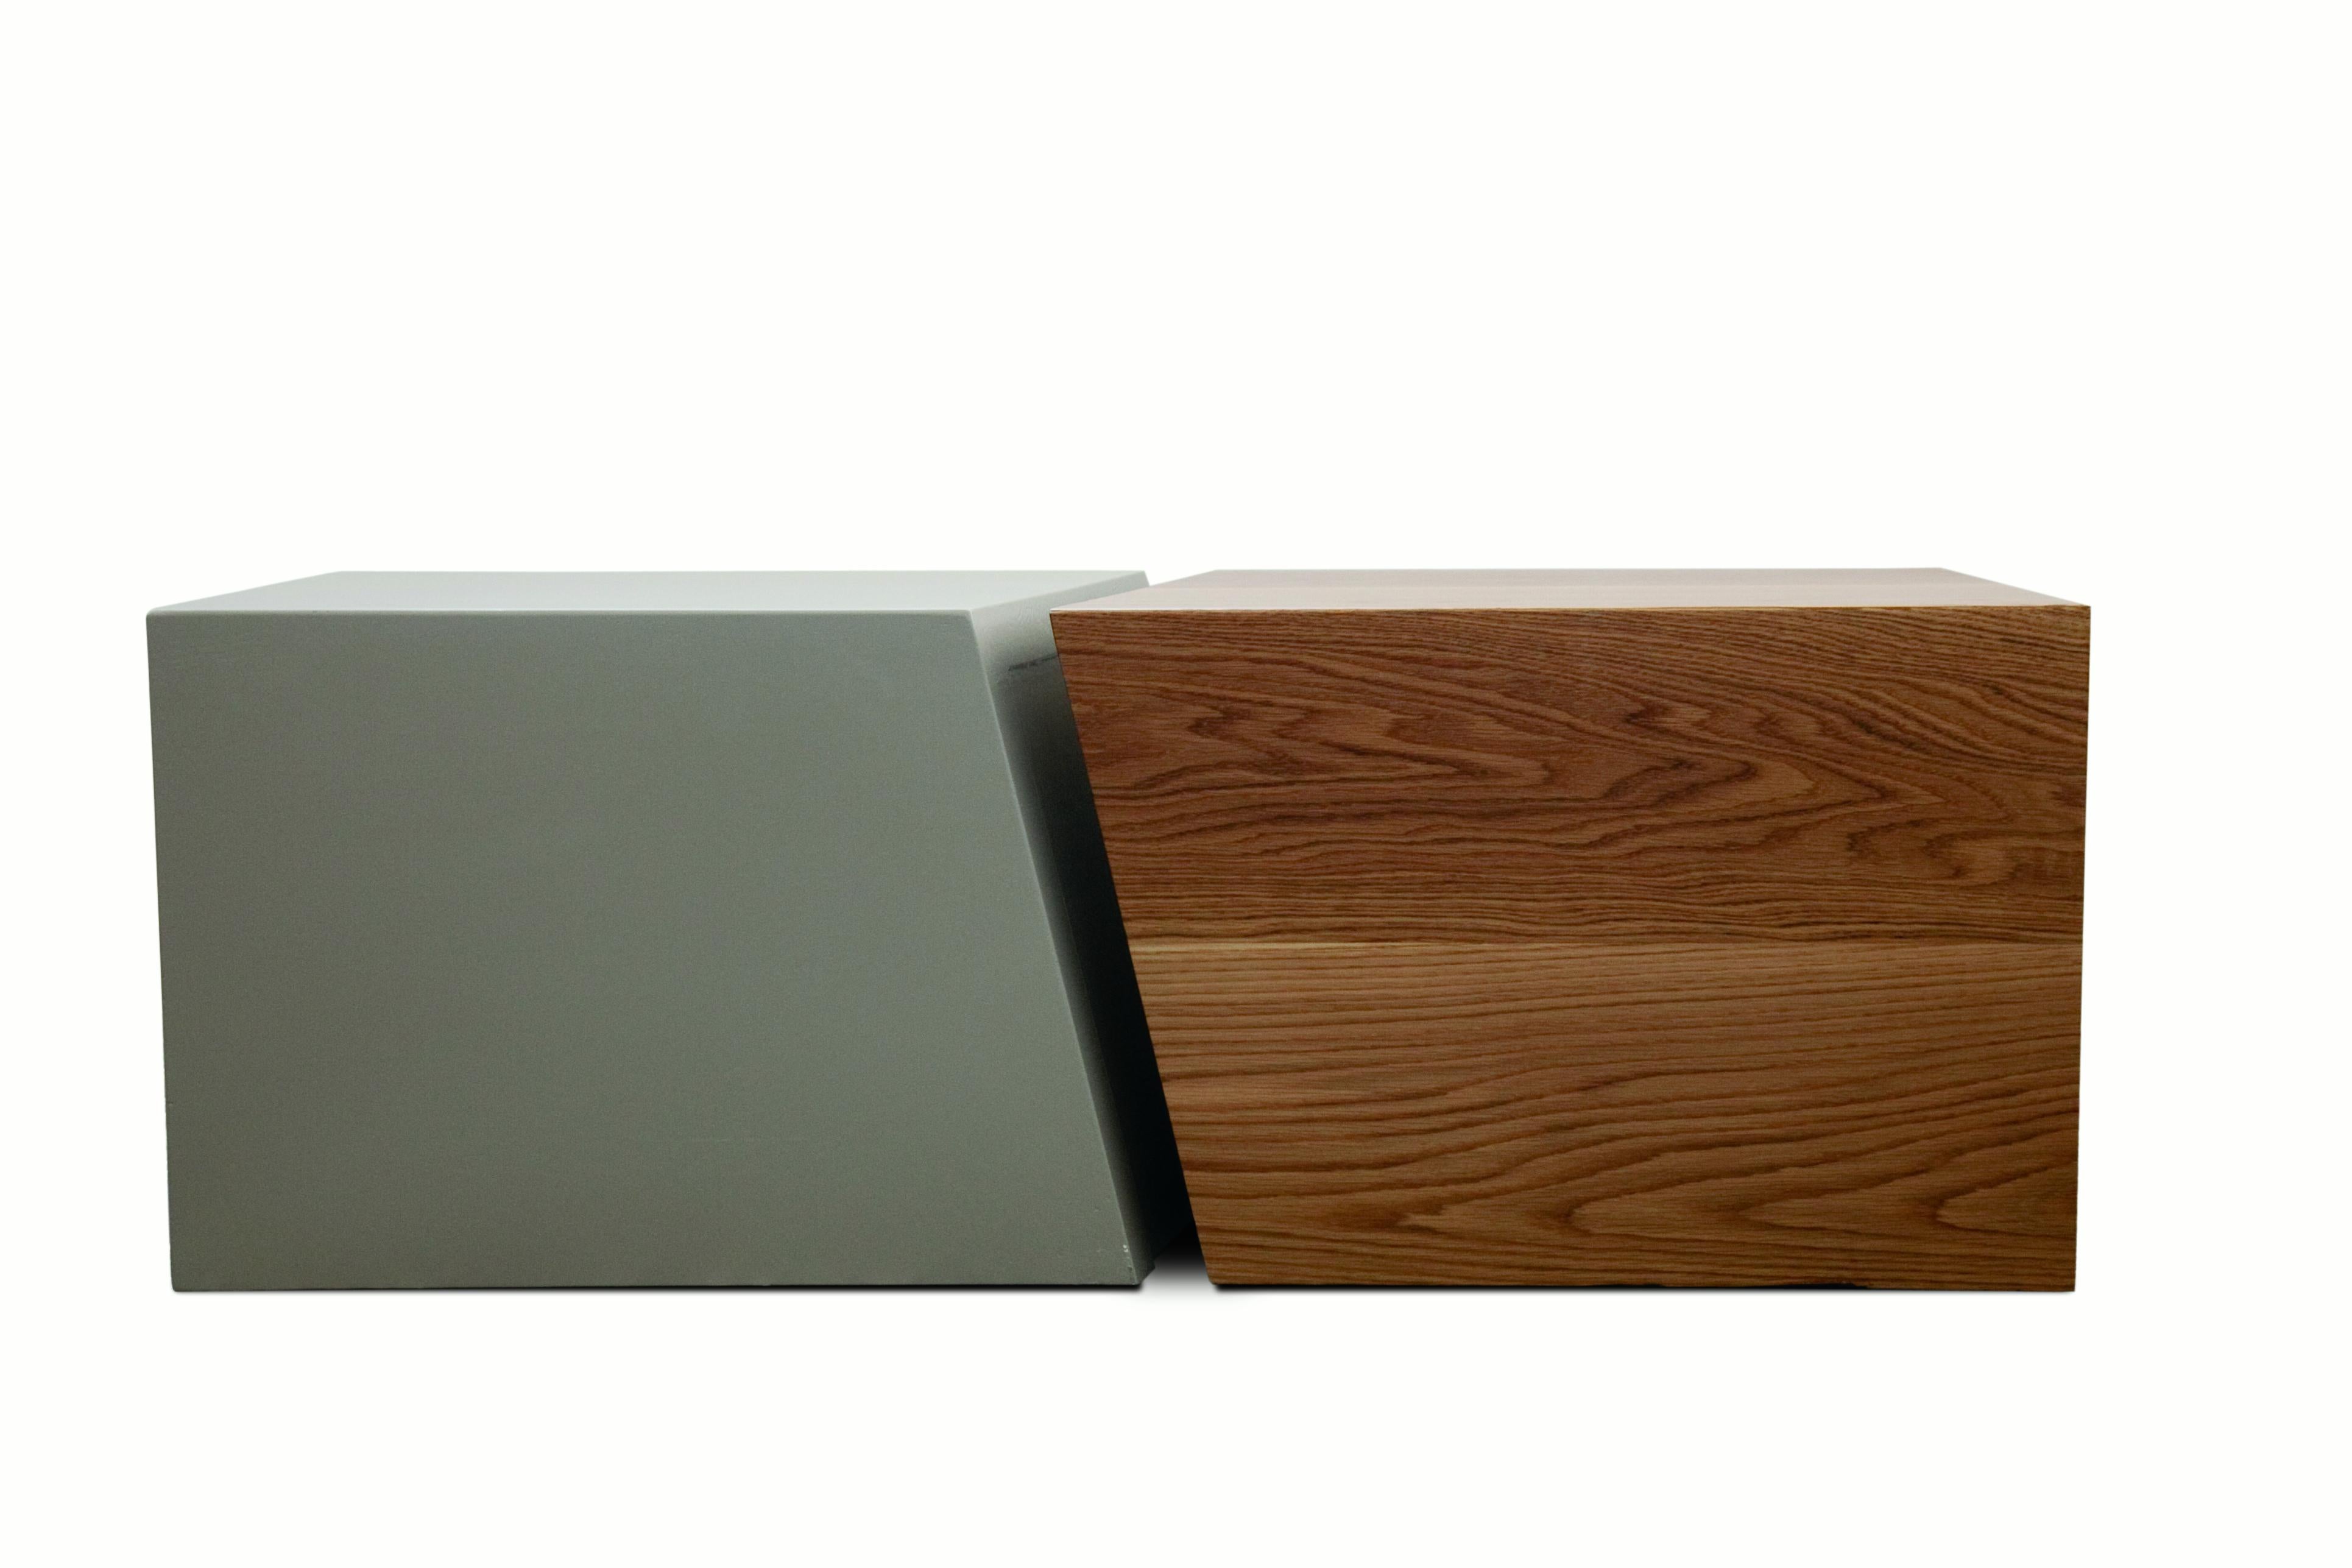 Contemporary 21st Century, Minimalist, European, Coffee table in Lacquer and Oakwood Handmade For Sale